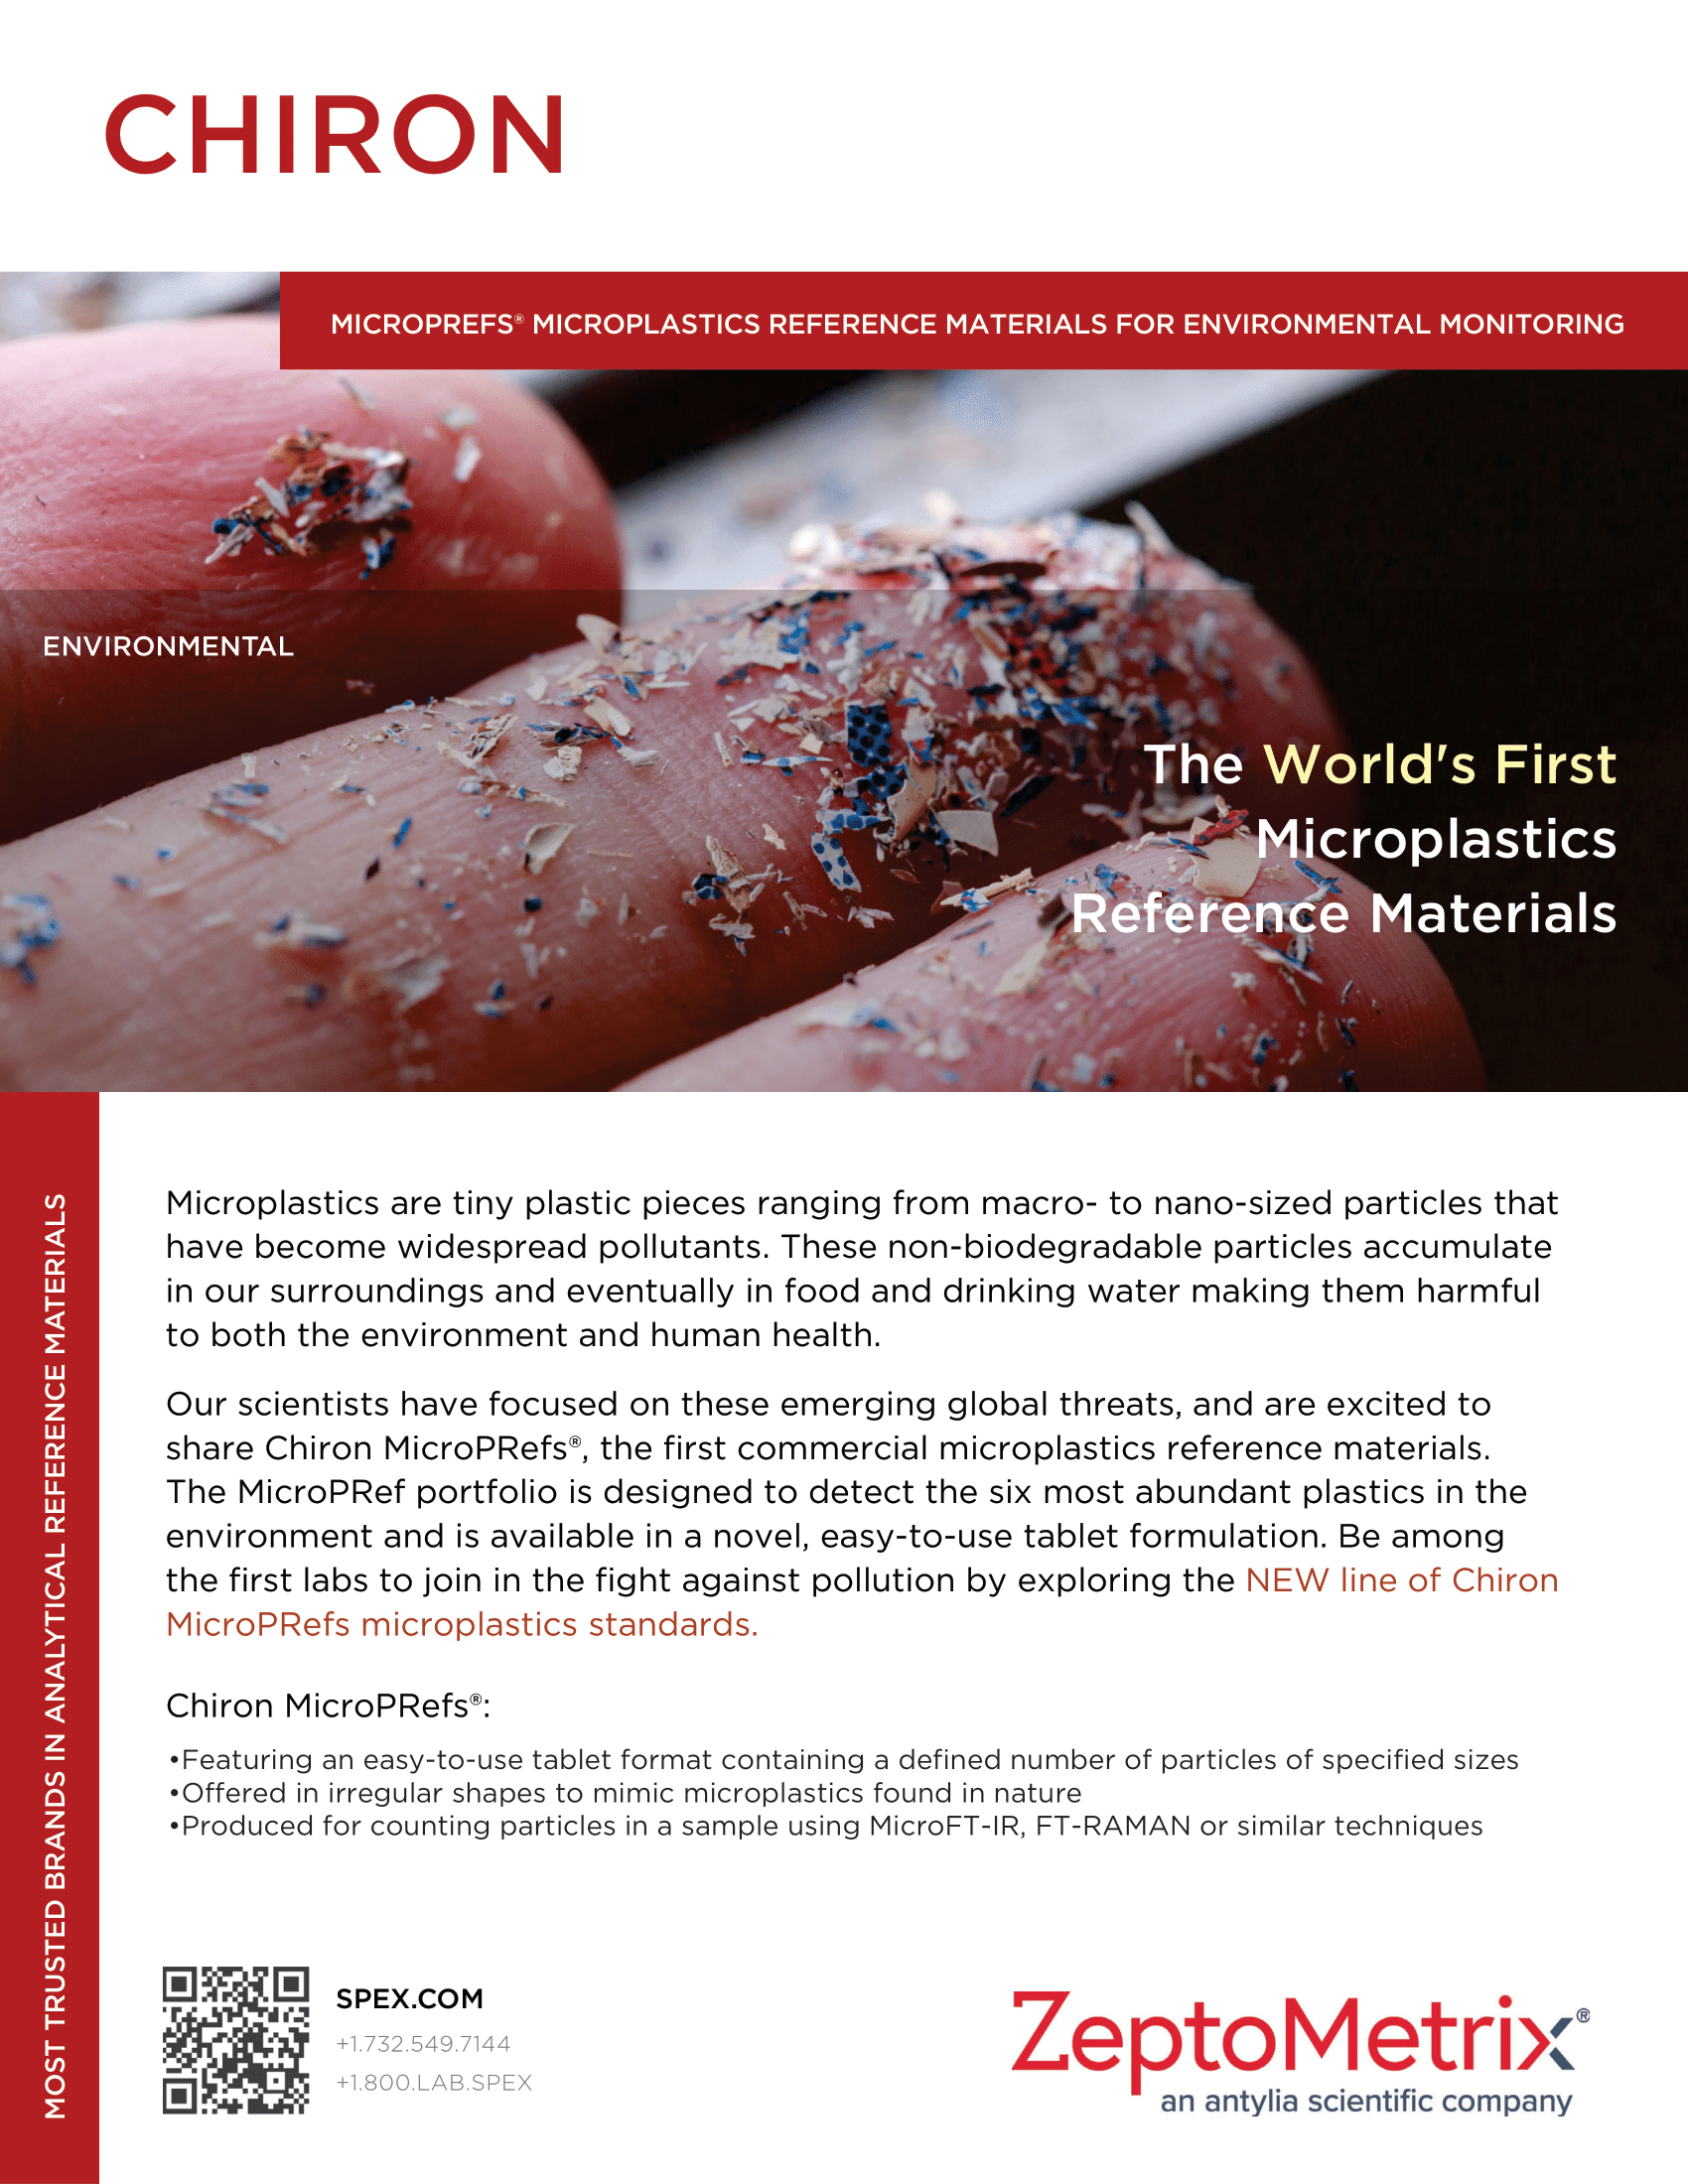 Microplastics: The world's first microplastic reference materials